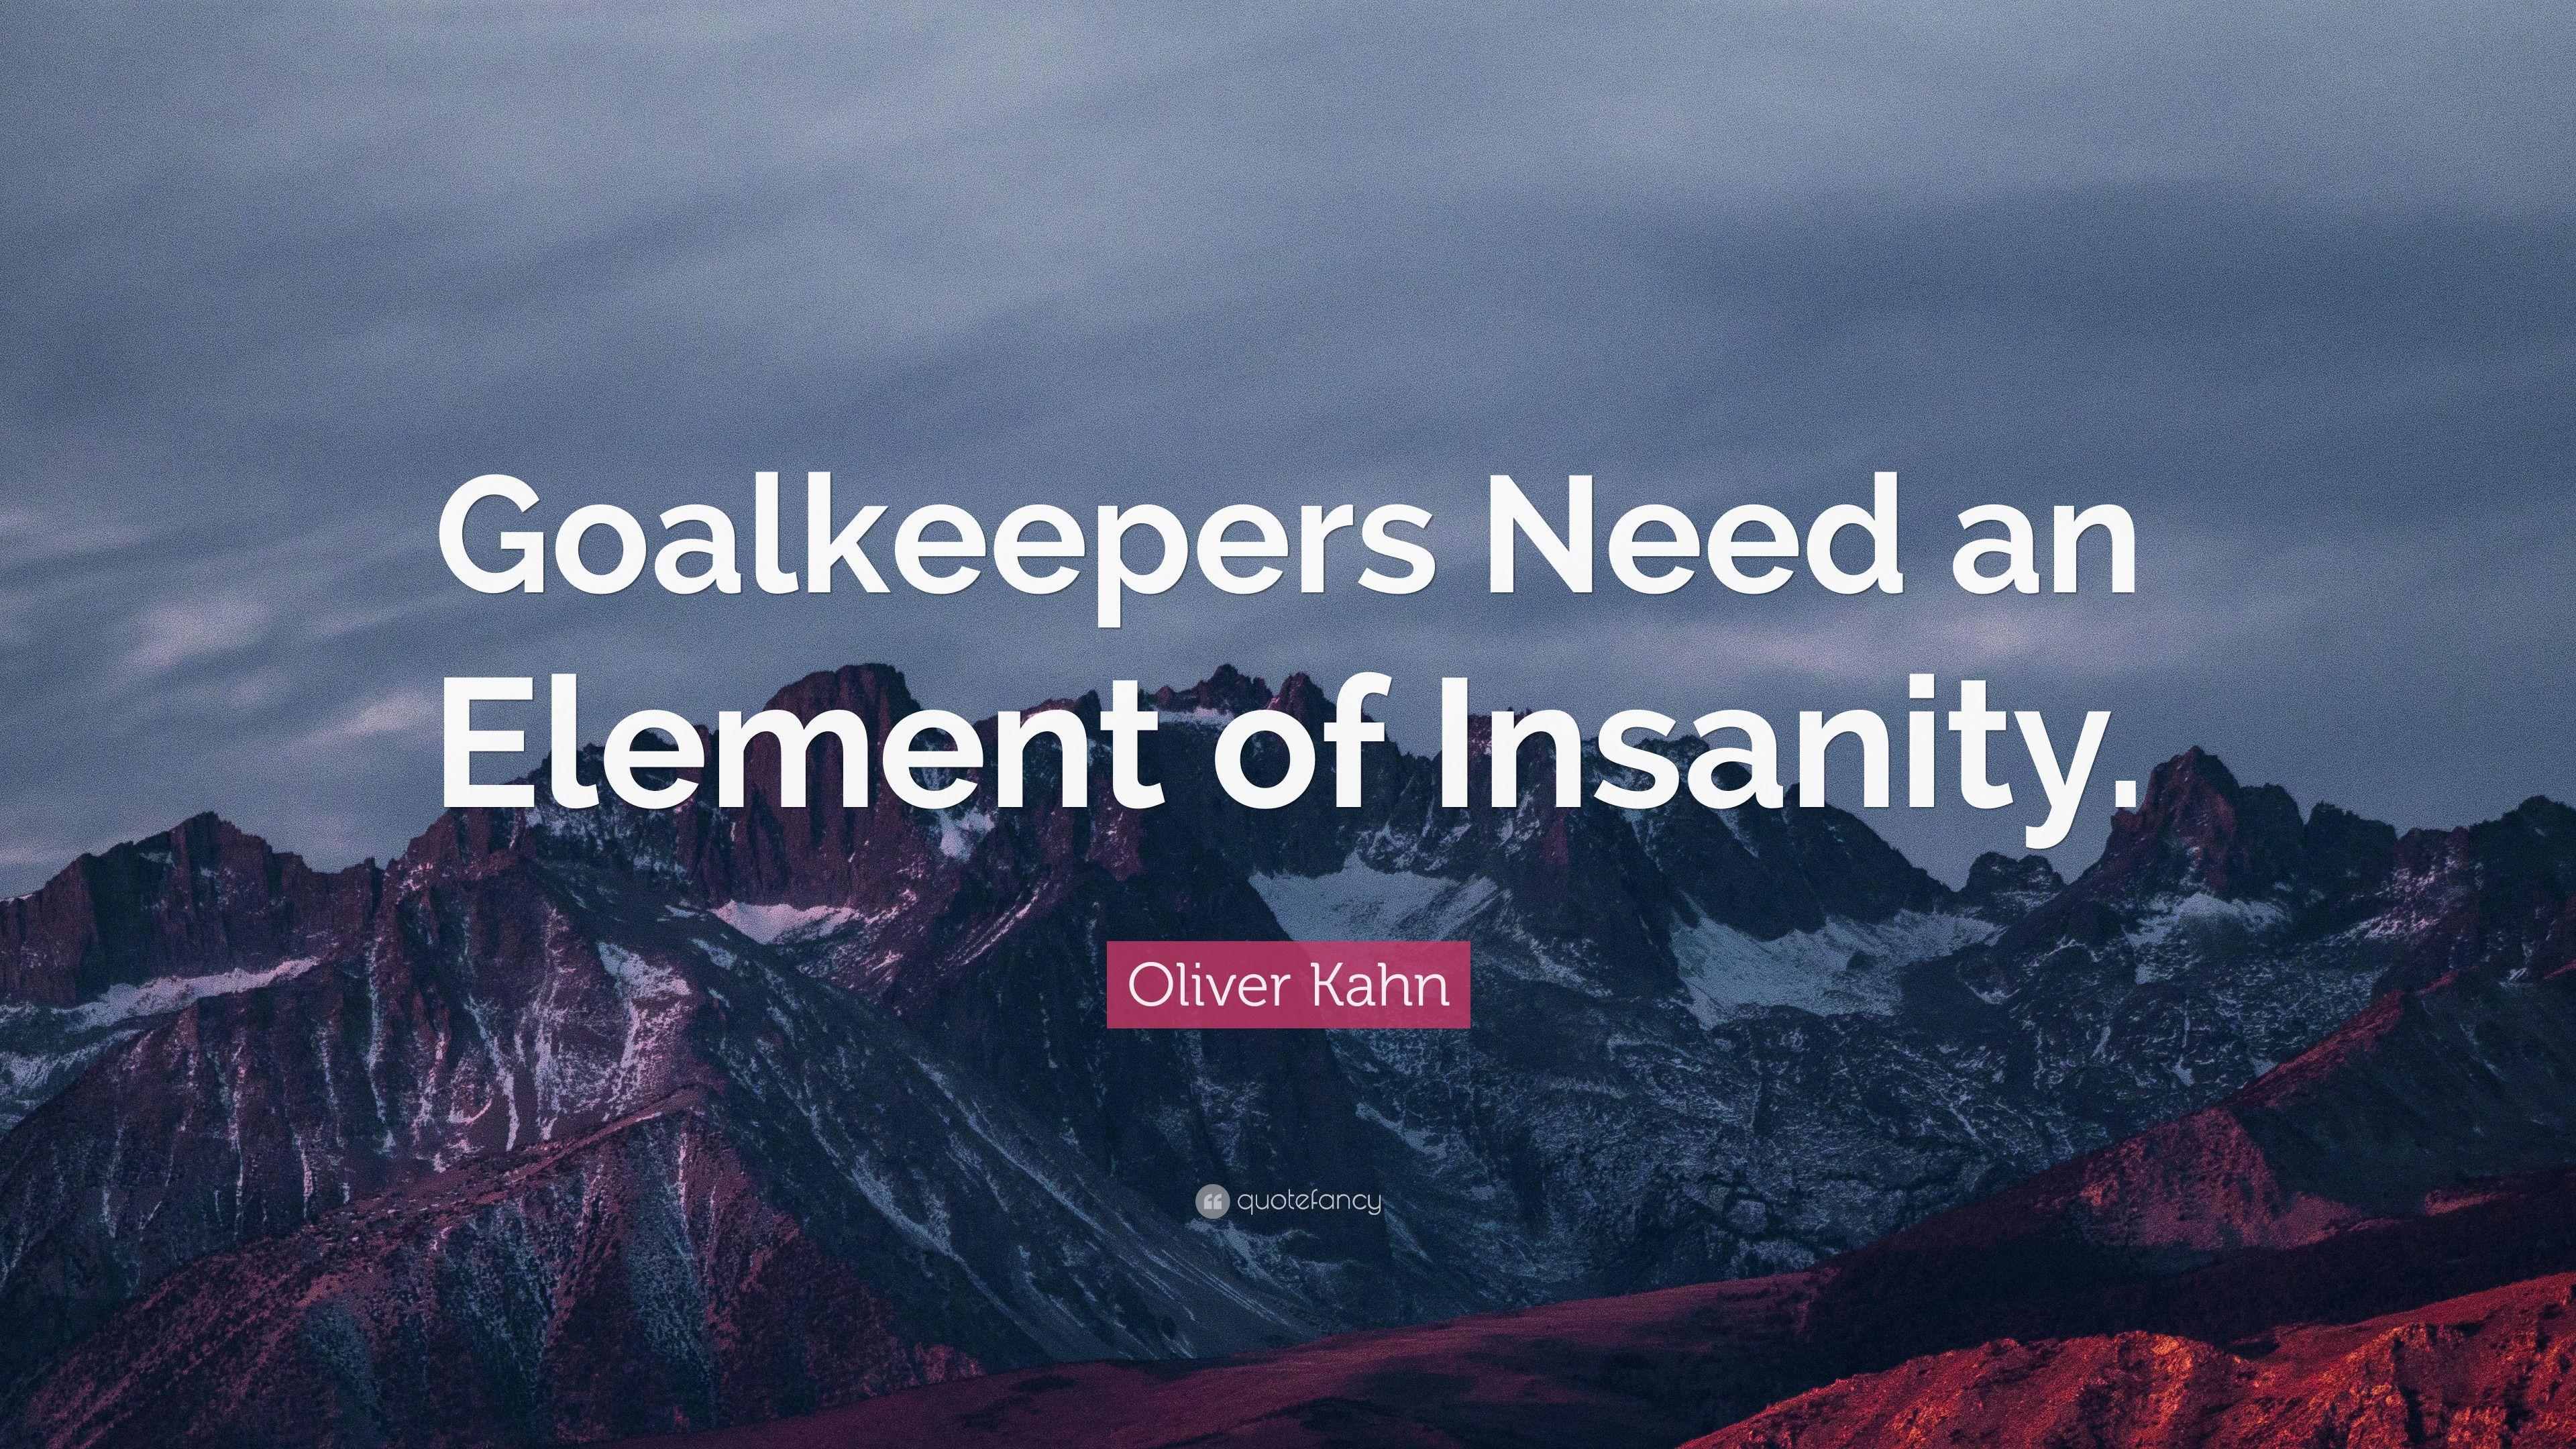 Oliver Kahn Quote: “Goalkeepers Need an Element of Insanity.” 5